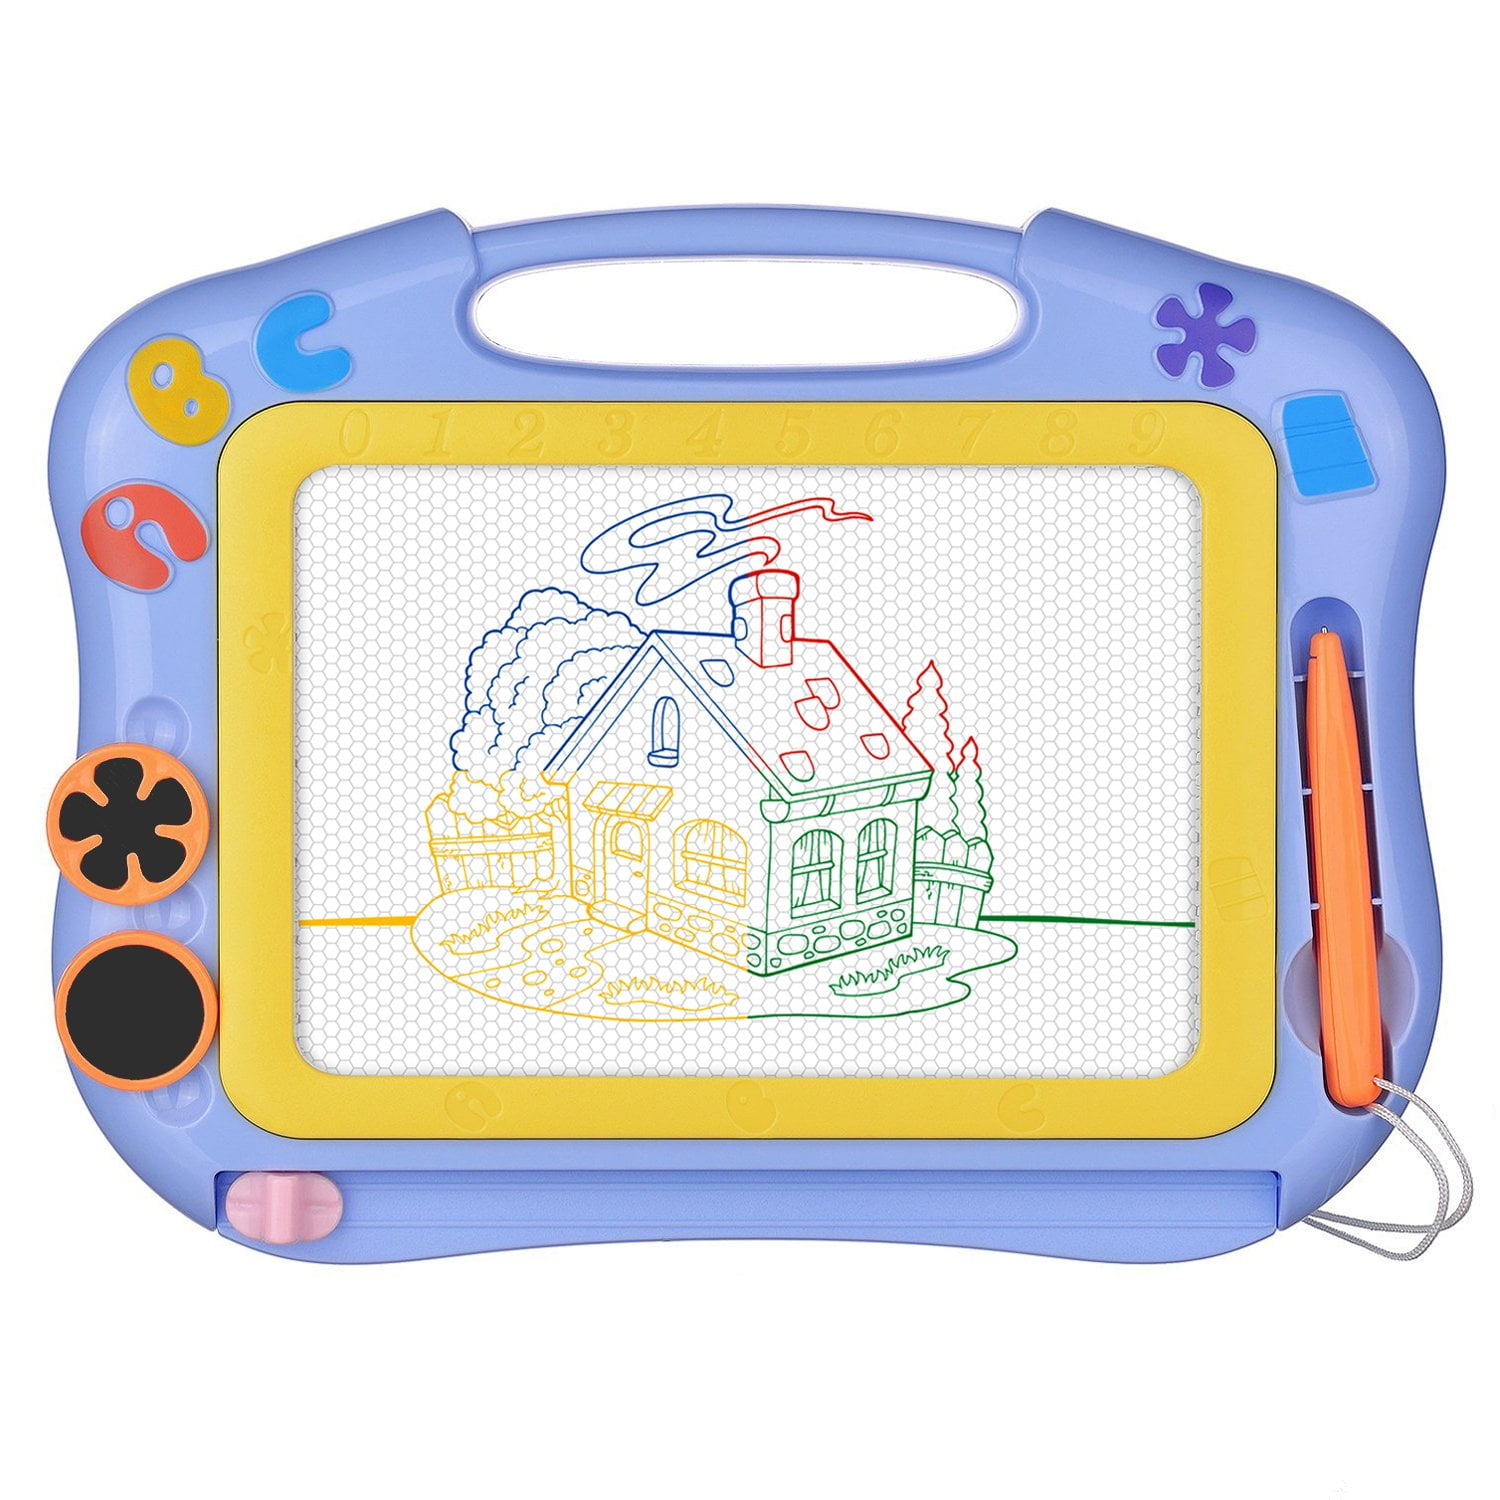 Large Erasable Doodle Board Writing Painting Sketch Pad Creative Educational Toys for Kids Boys Girls AiTuiTui Magnetic Drawing Board for Toddlers